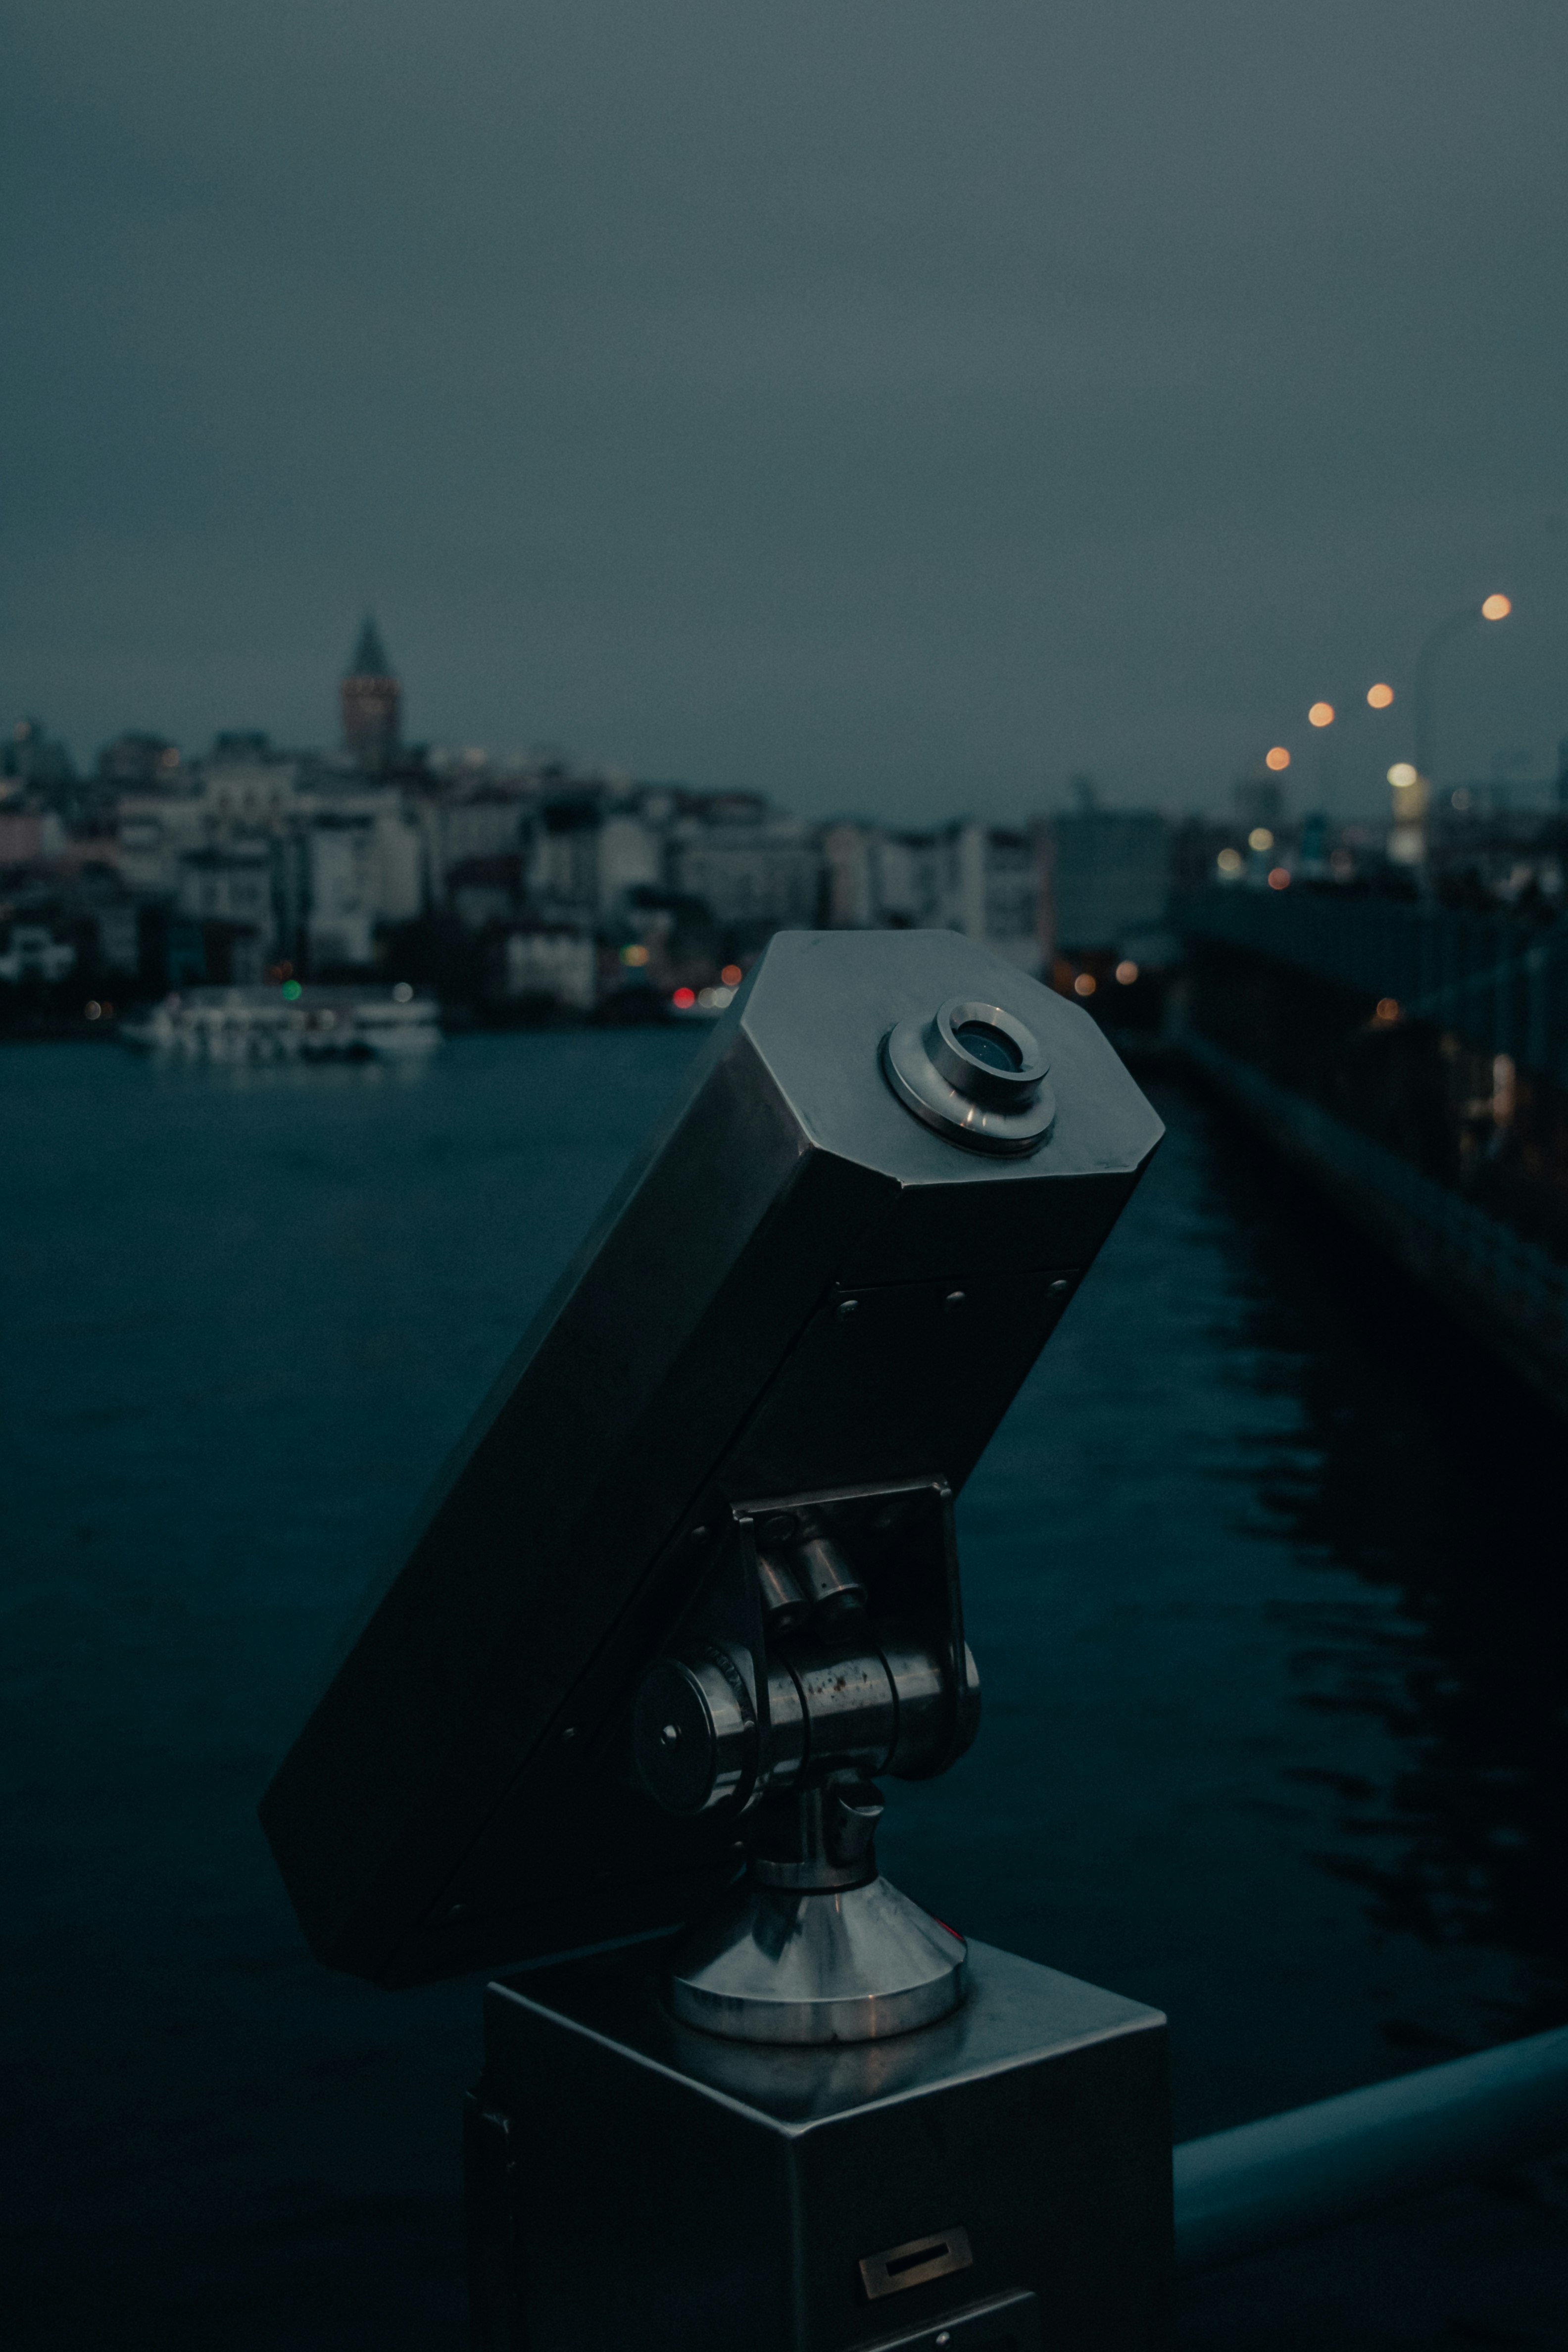 black telescope in front of city buildings during night time